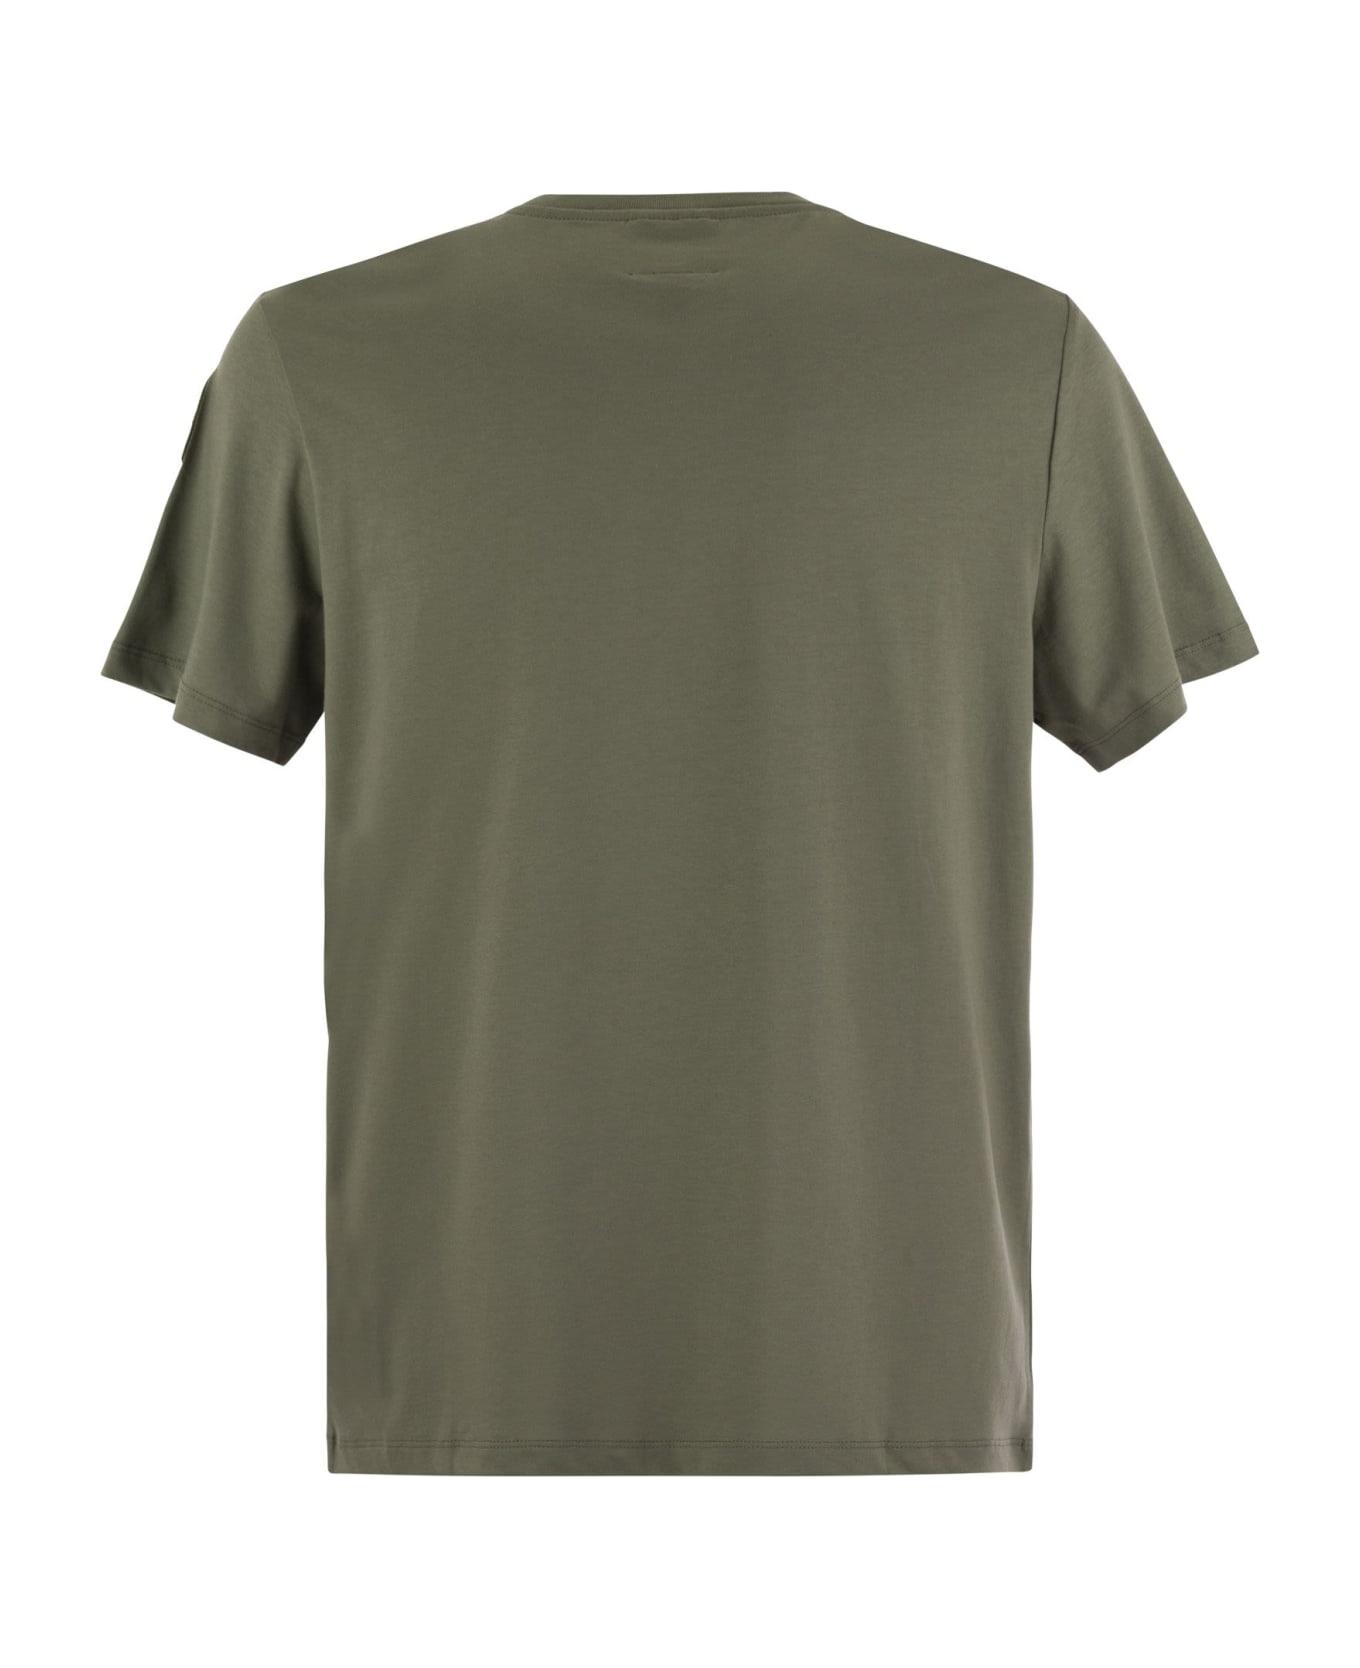 Parajumpers Shispare Tee - Cotton Jersey T-shirt - Military Green シャツ